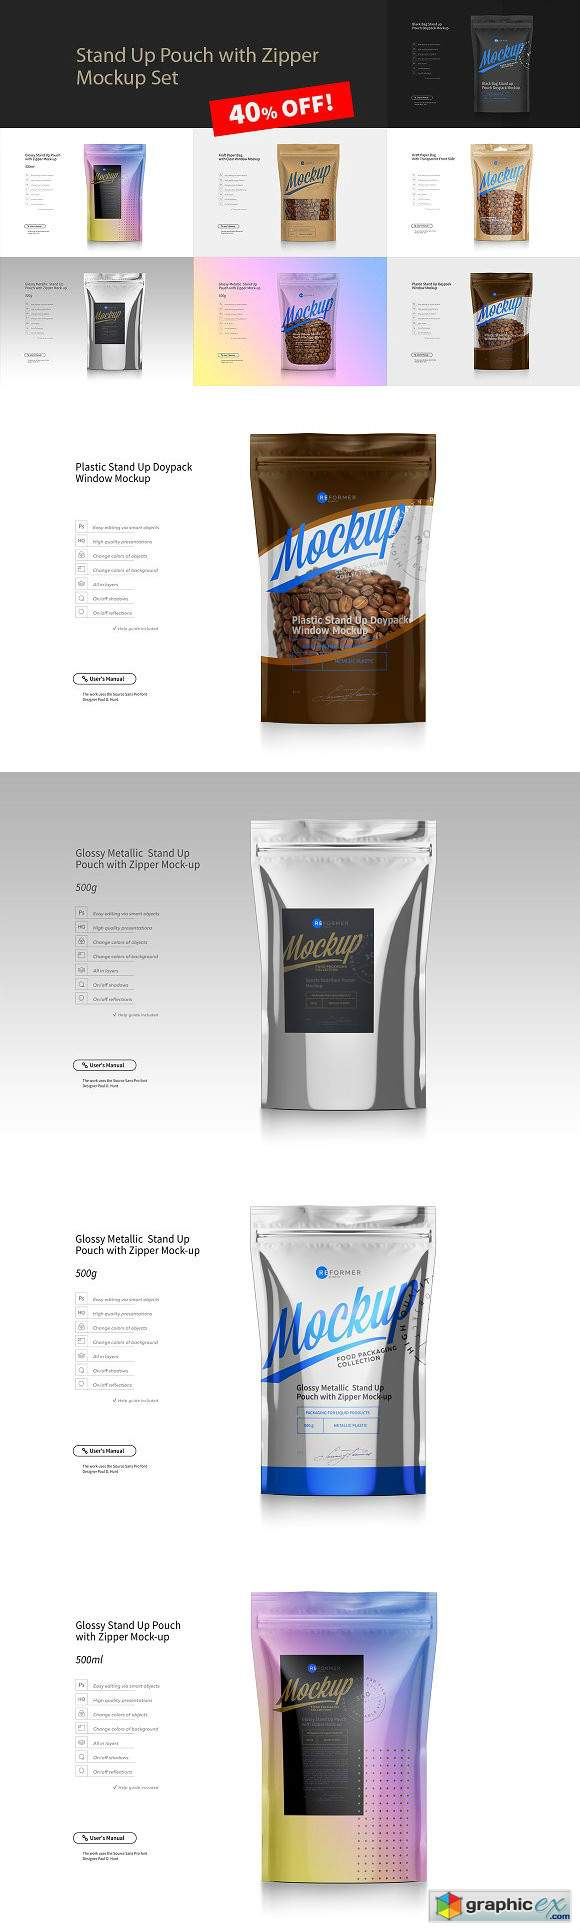 Stand Up Pouch Mockup Set